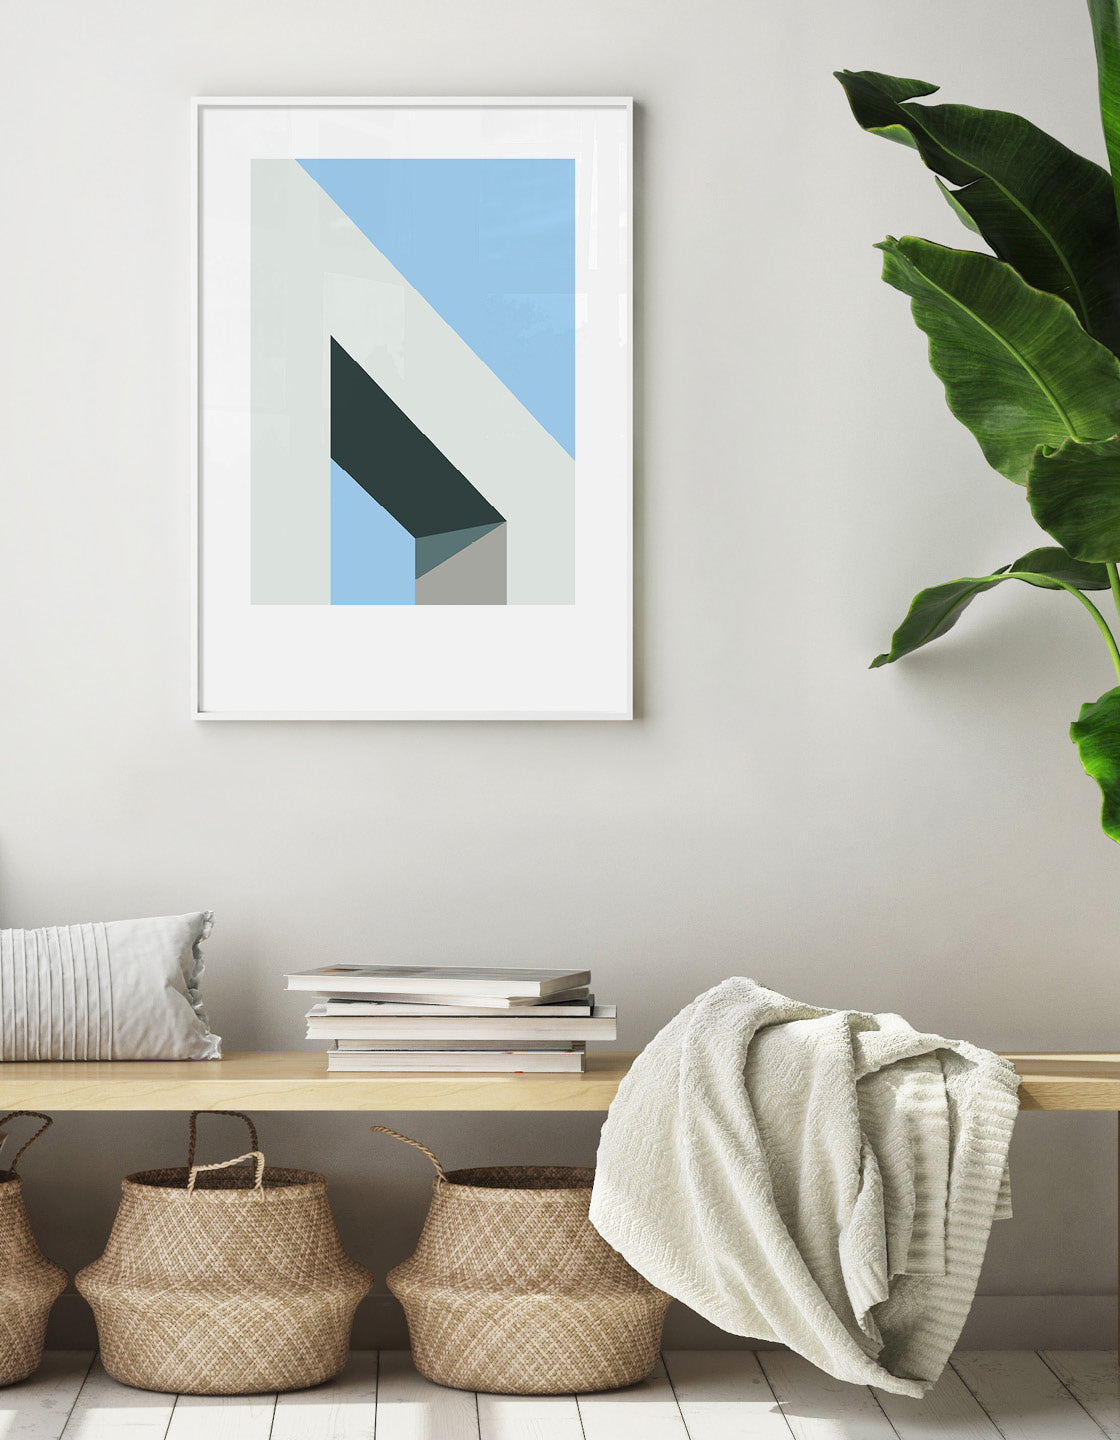 Home office art print / Minimal abstract gallery wall ideas